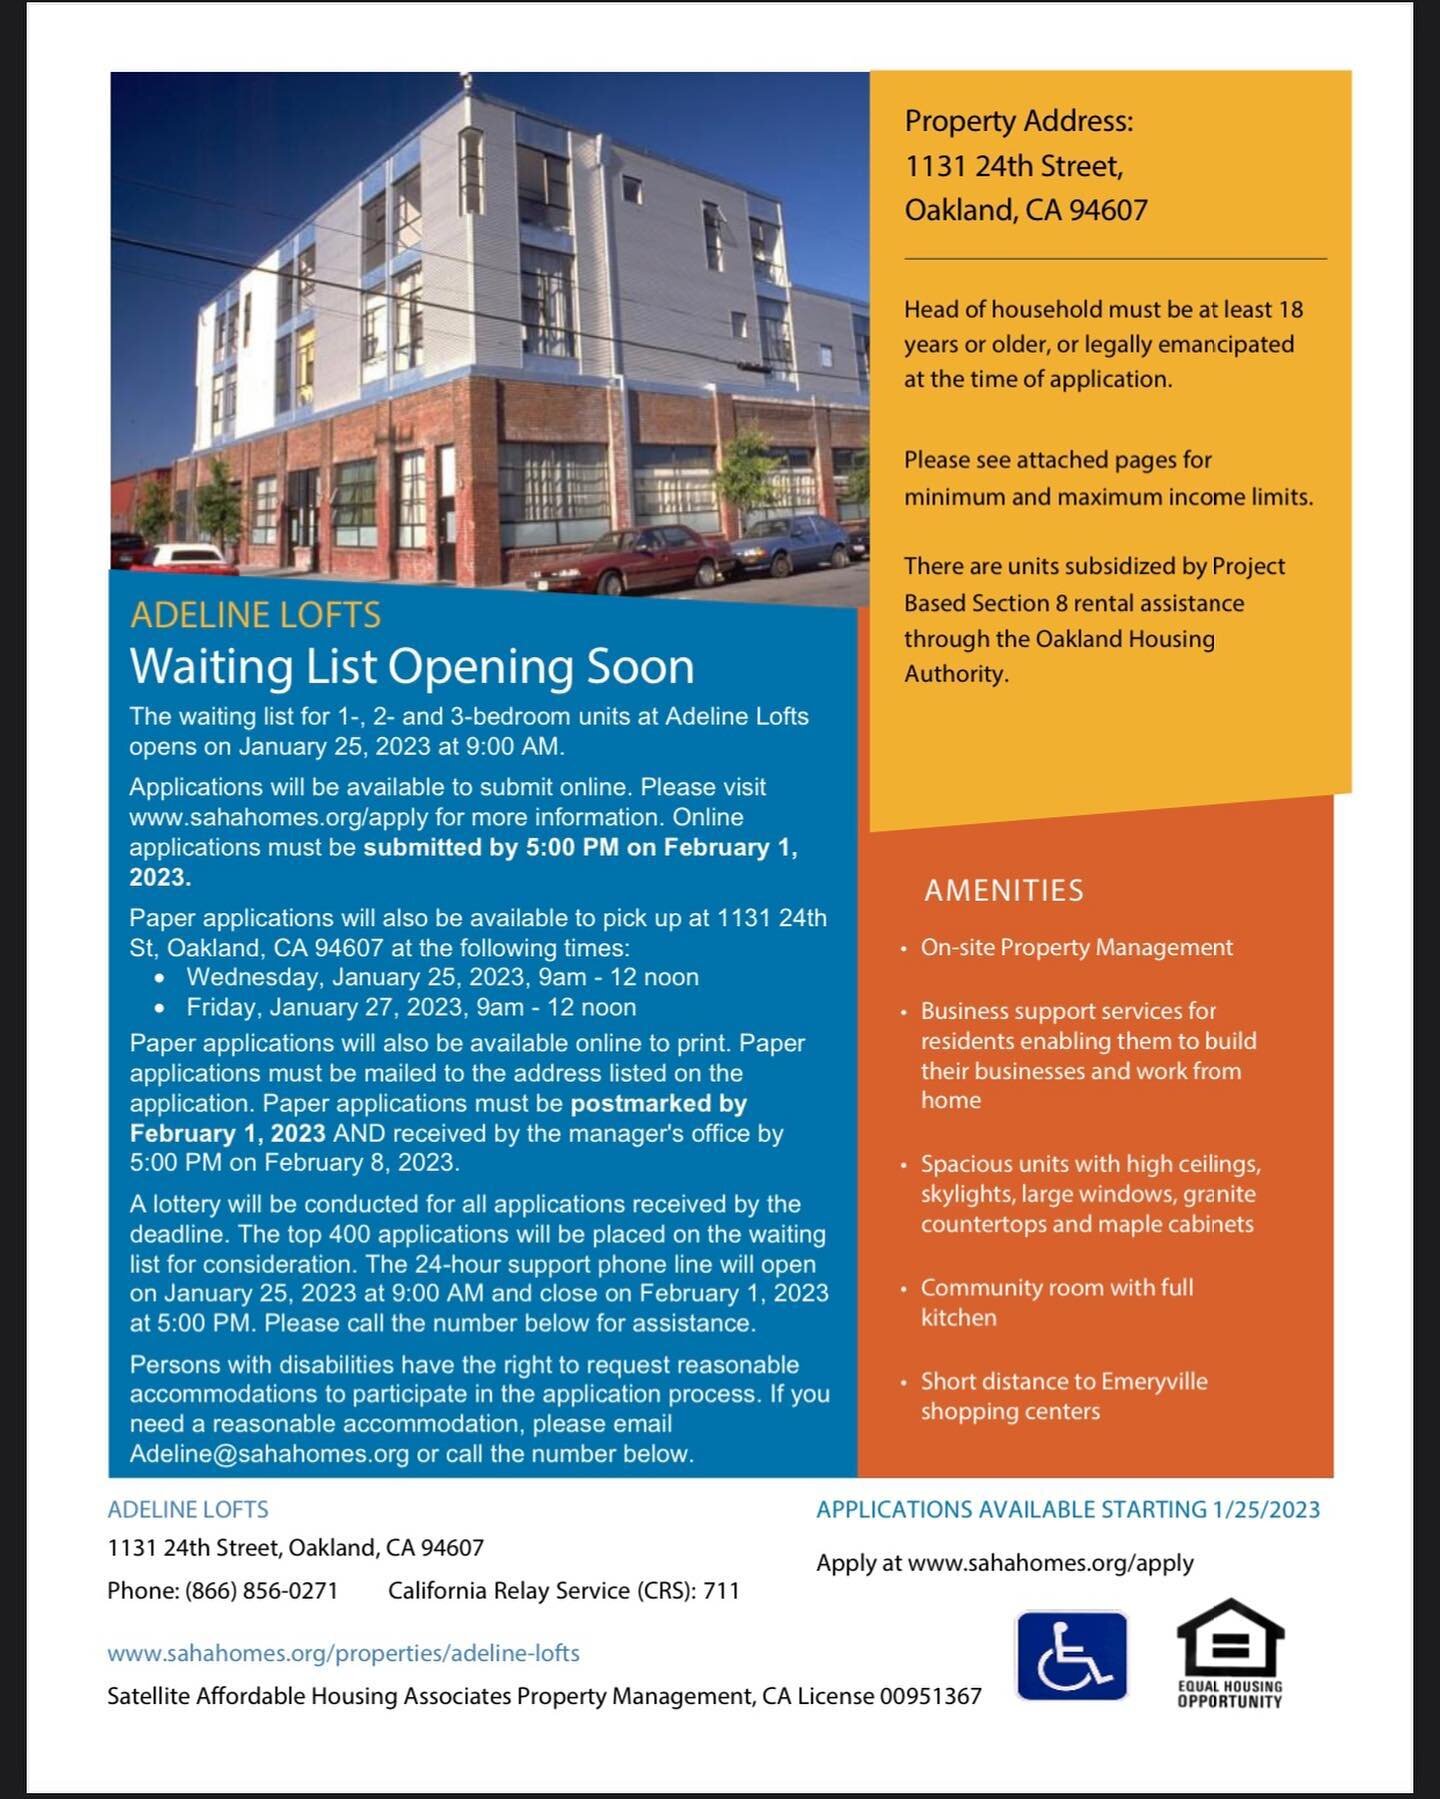 Share share share!!! 🏠 Adeline Lofts 1, 2, and 3 bedroom waitlist is open now in West Oakland! Go to the SAHA website 🏠